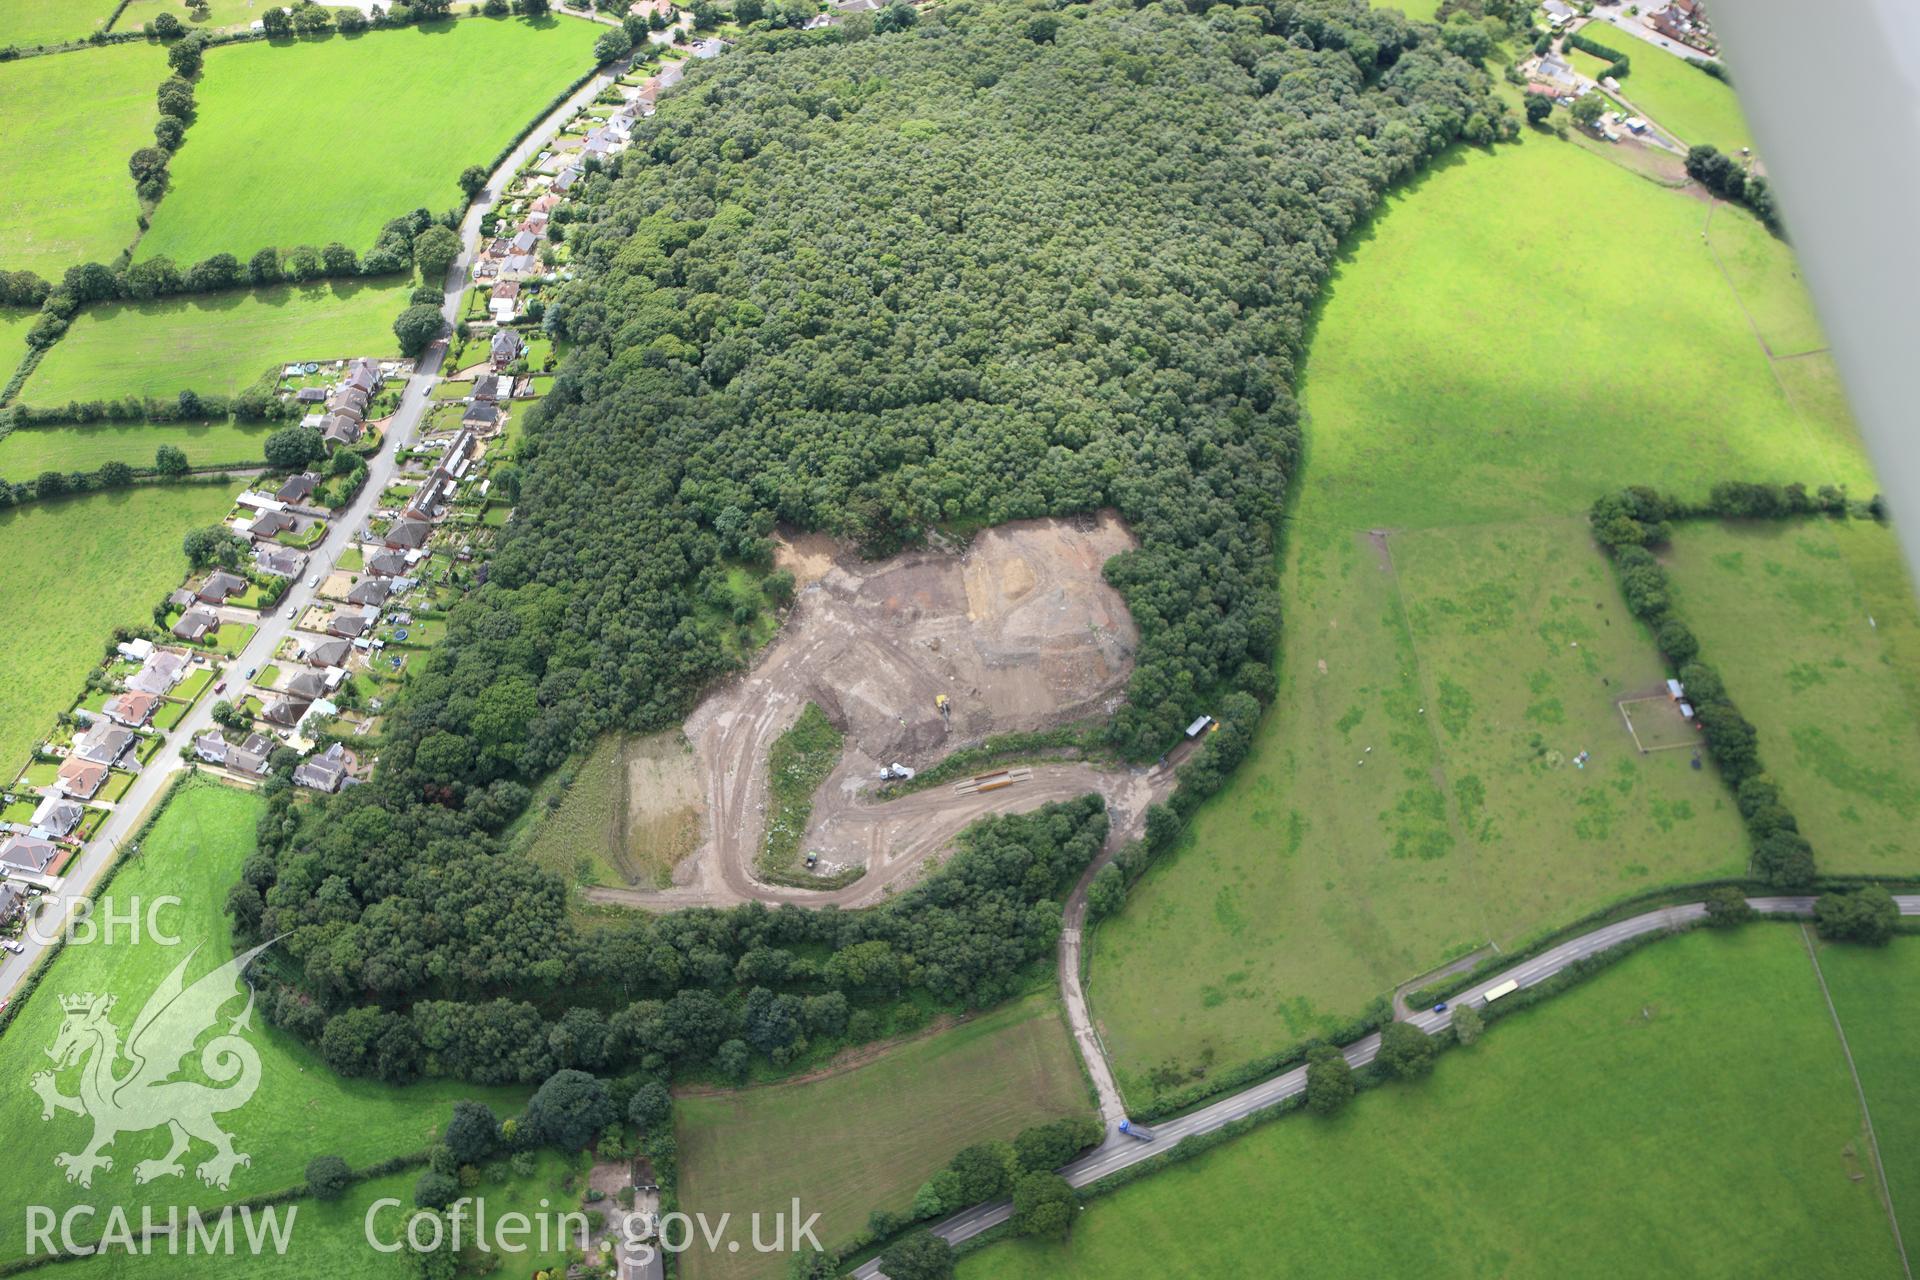 RCAHMW colour oblique aerial photograph of Caer Estyn Hill Fort. Taken on 30 July 2009 by Toby Driver